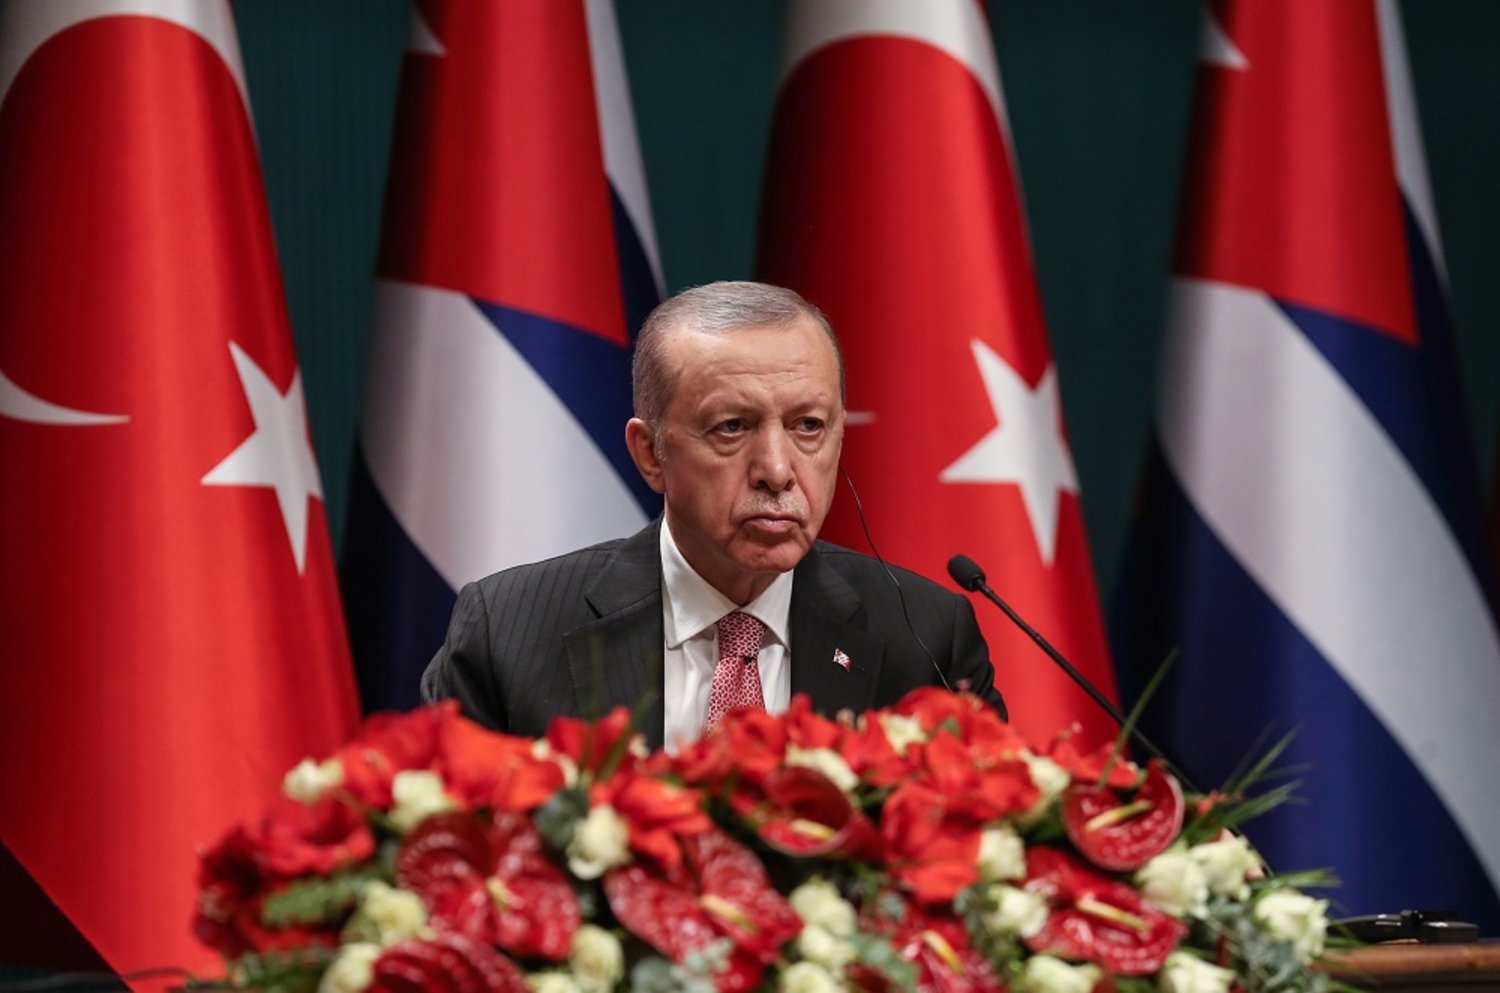 Turkish President Recep Tayyip Erdogan attends a press conference after a meeting with Cuban President Miguel Diaz-Canel at the Presidential Palace in Ankara, Türkiye, 23 November 2022. (EPA)